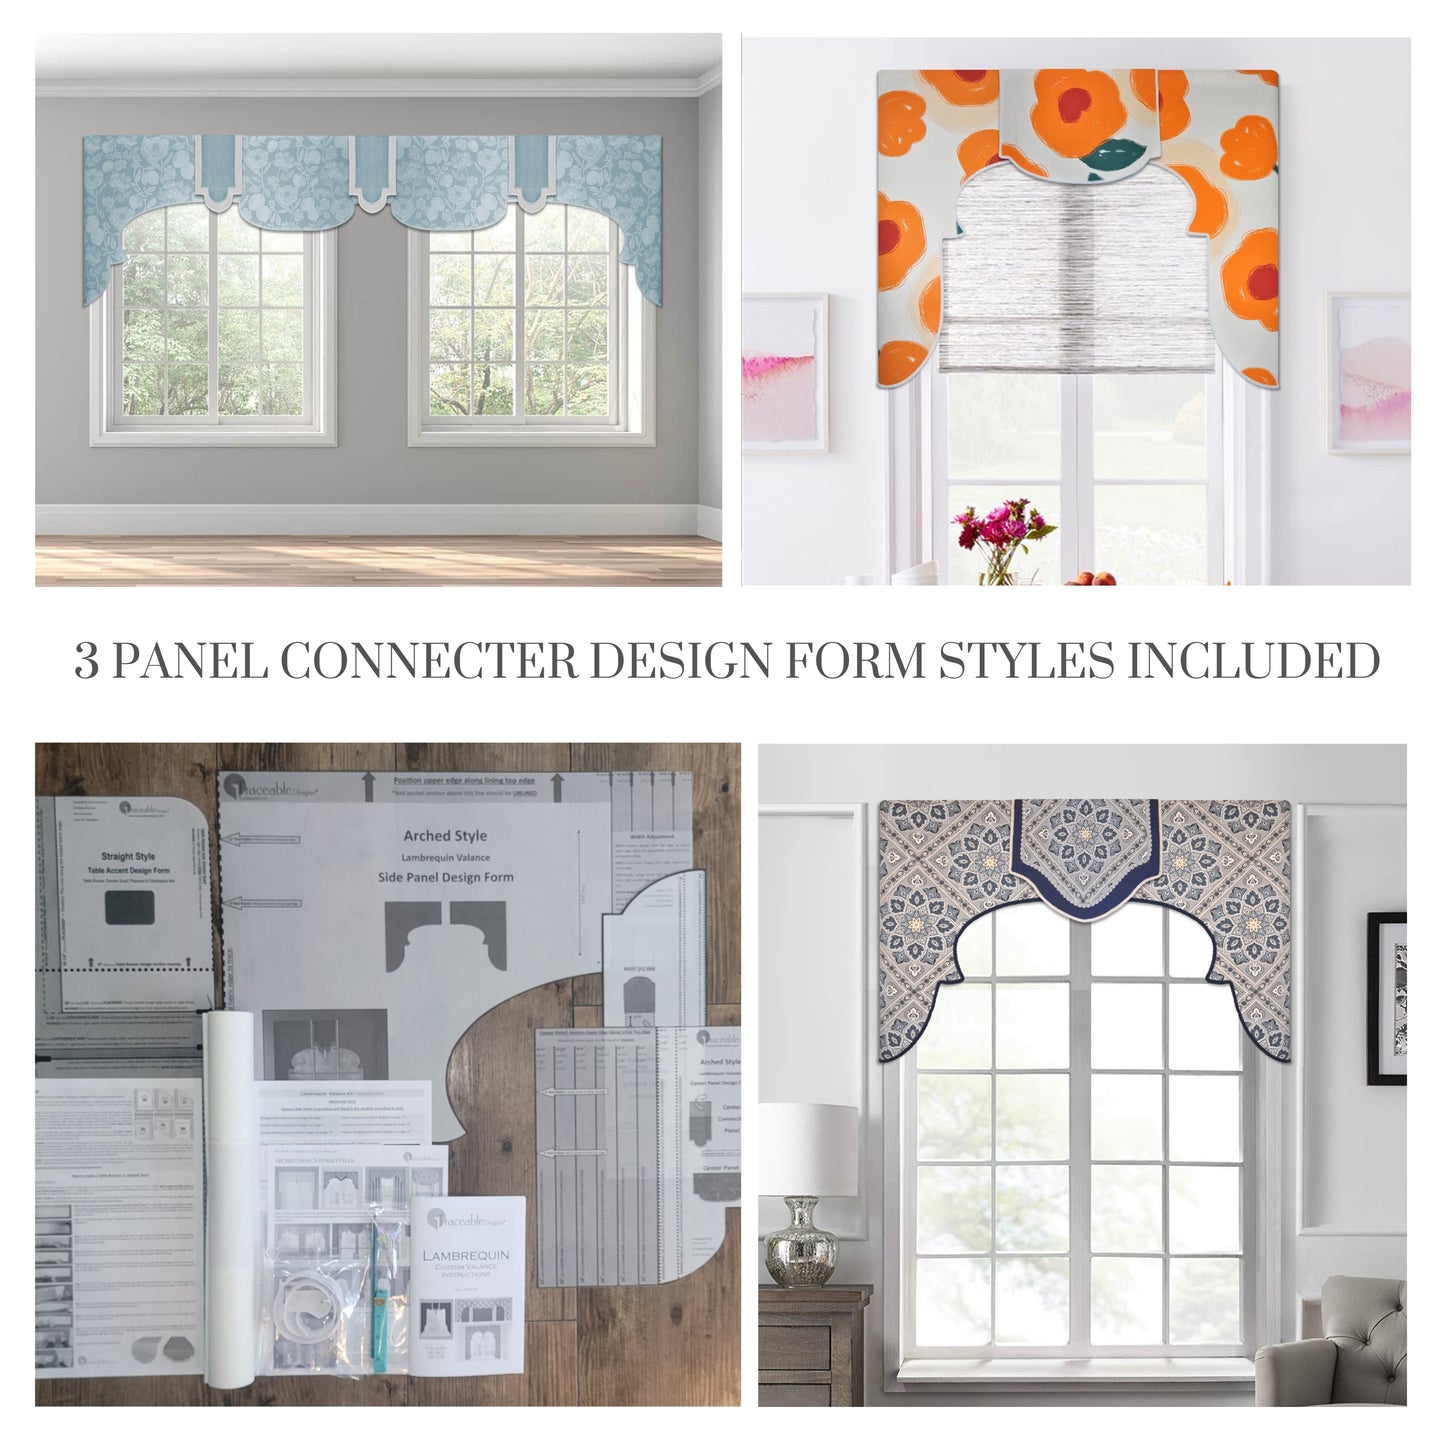 Traceable Designer arched style no-sew lambrequin valance kit inlcudes traceable valance design forms used to make custom valances without sewing. Use a 1" curtain rod.